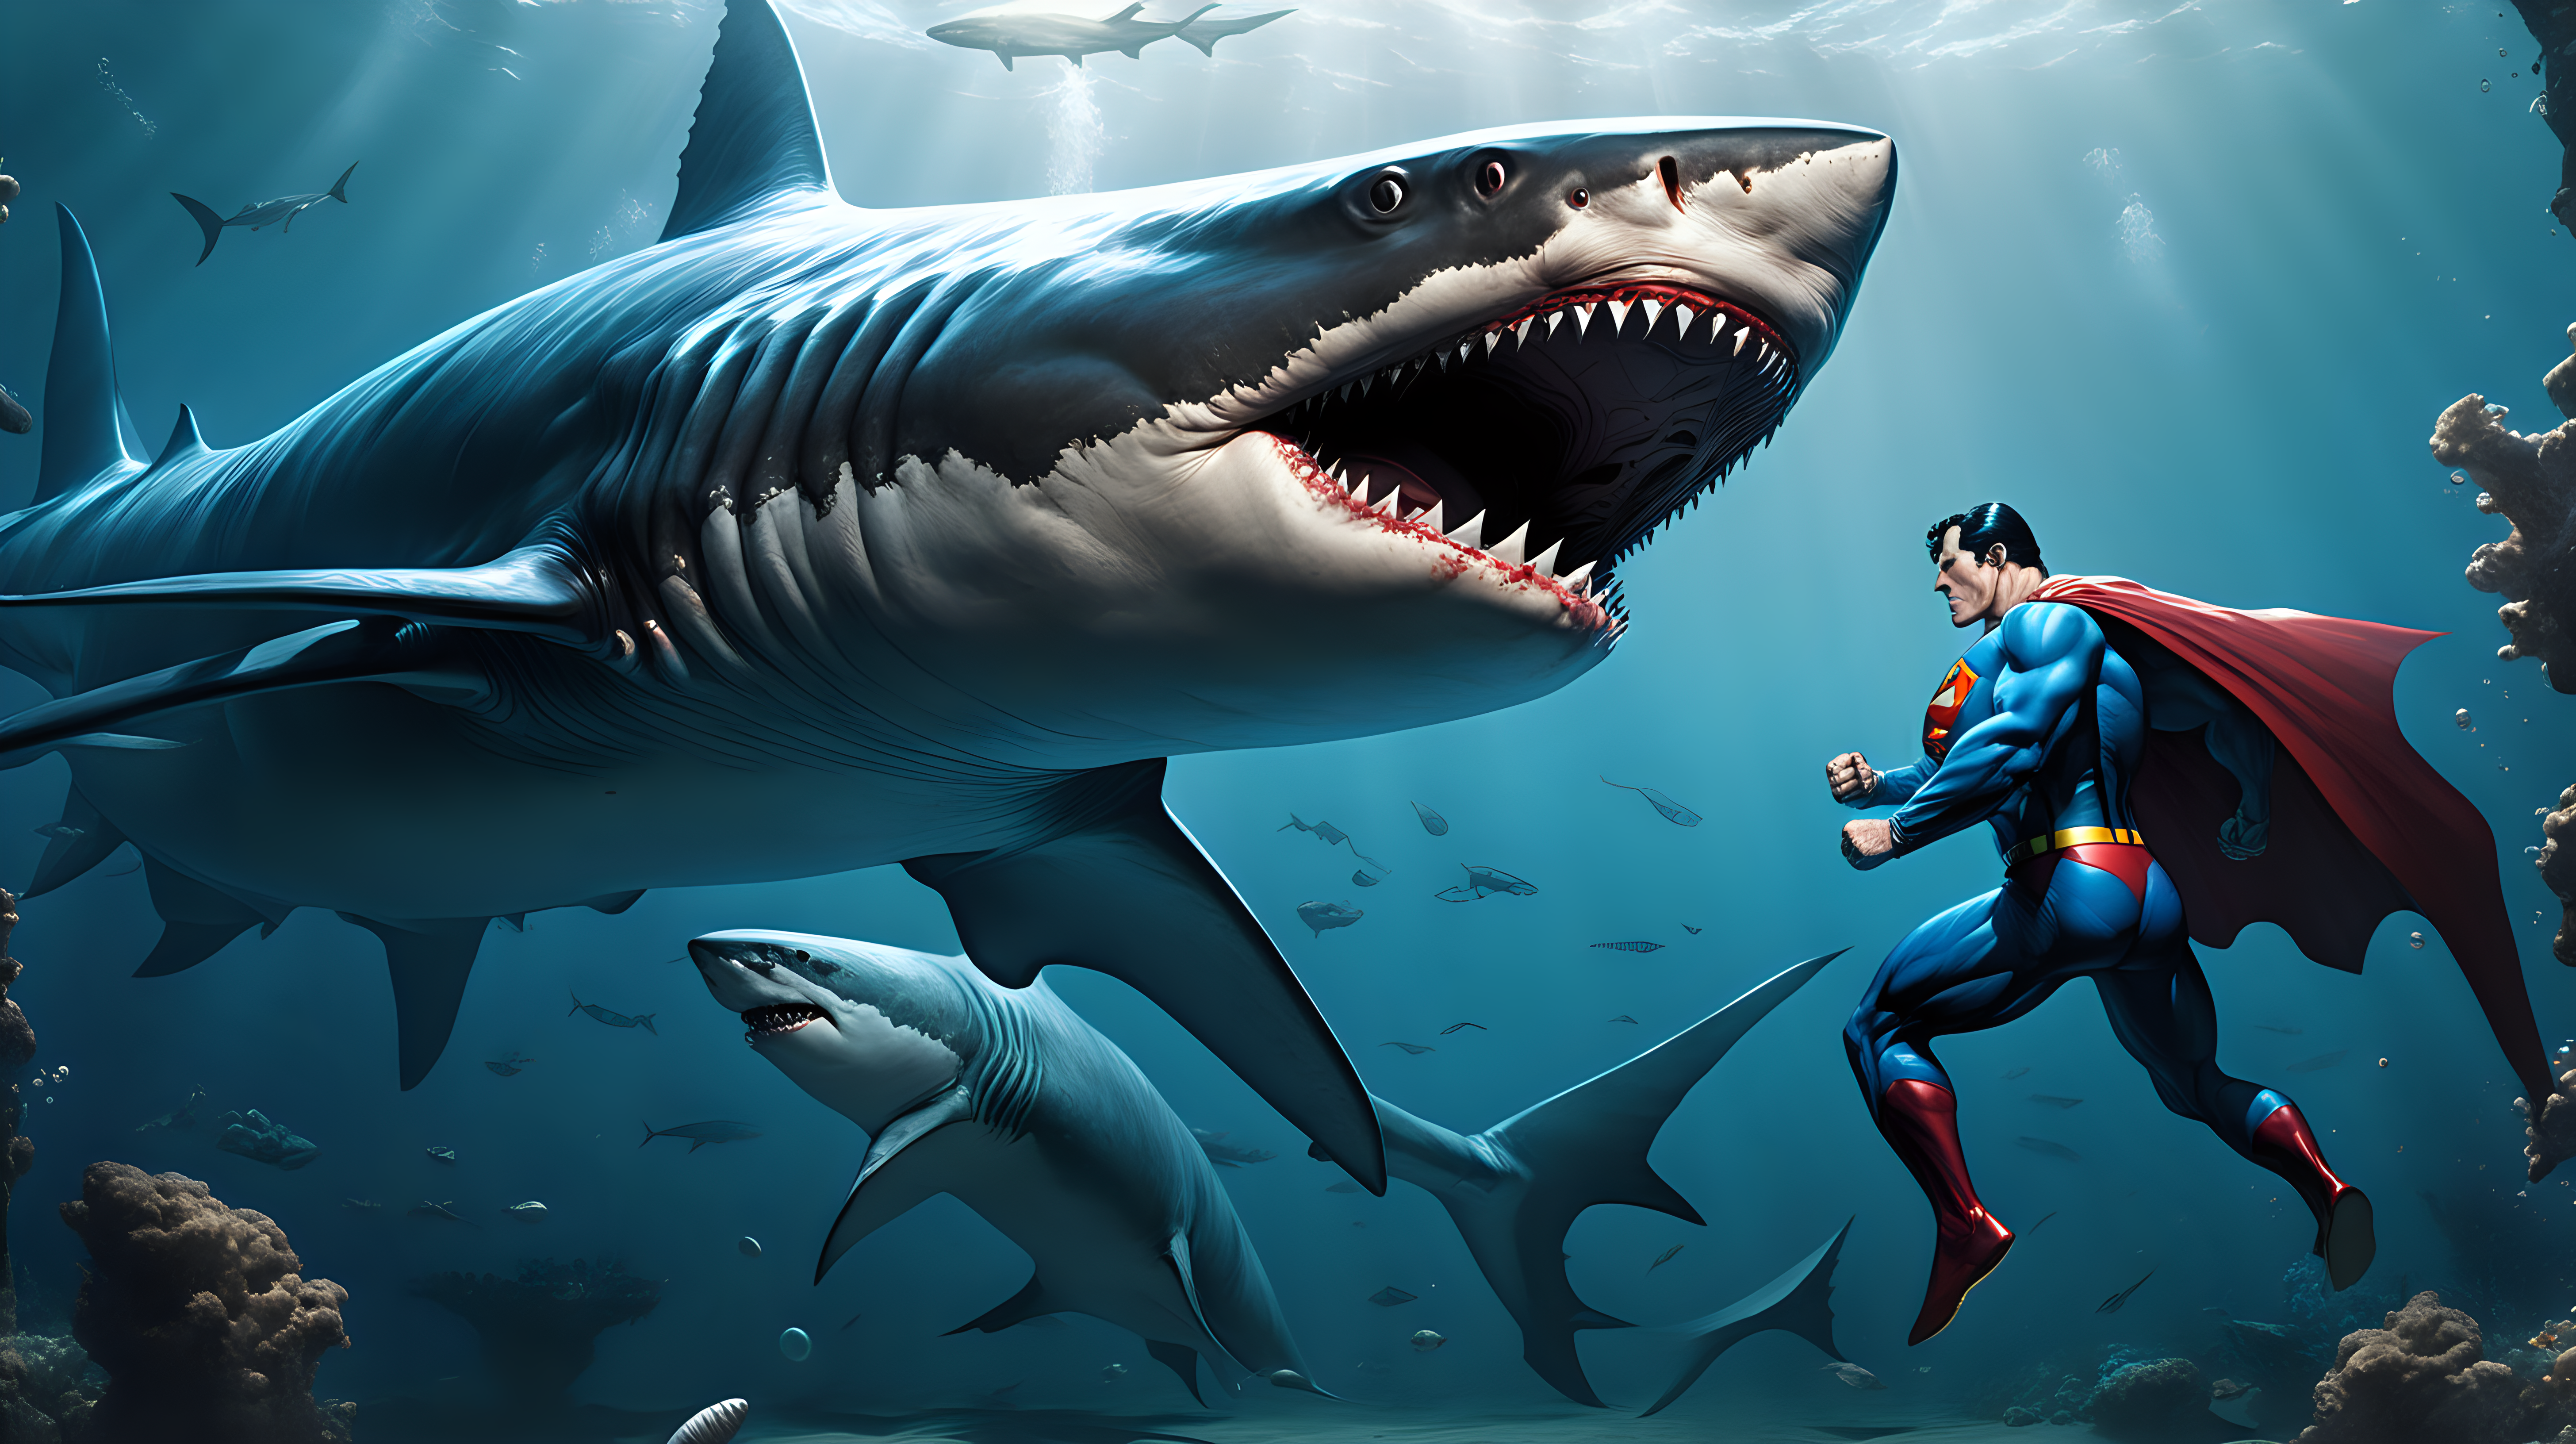 Superman fights a giant shark with legs and wings underwater